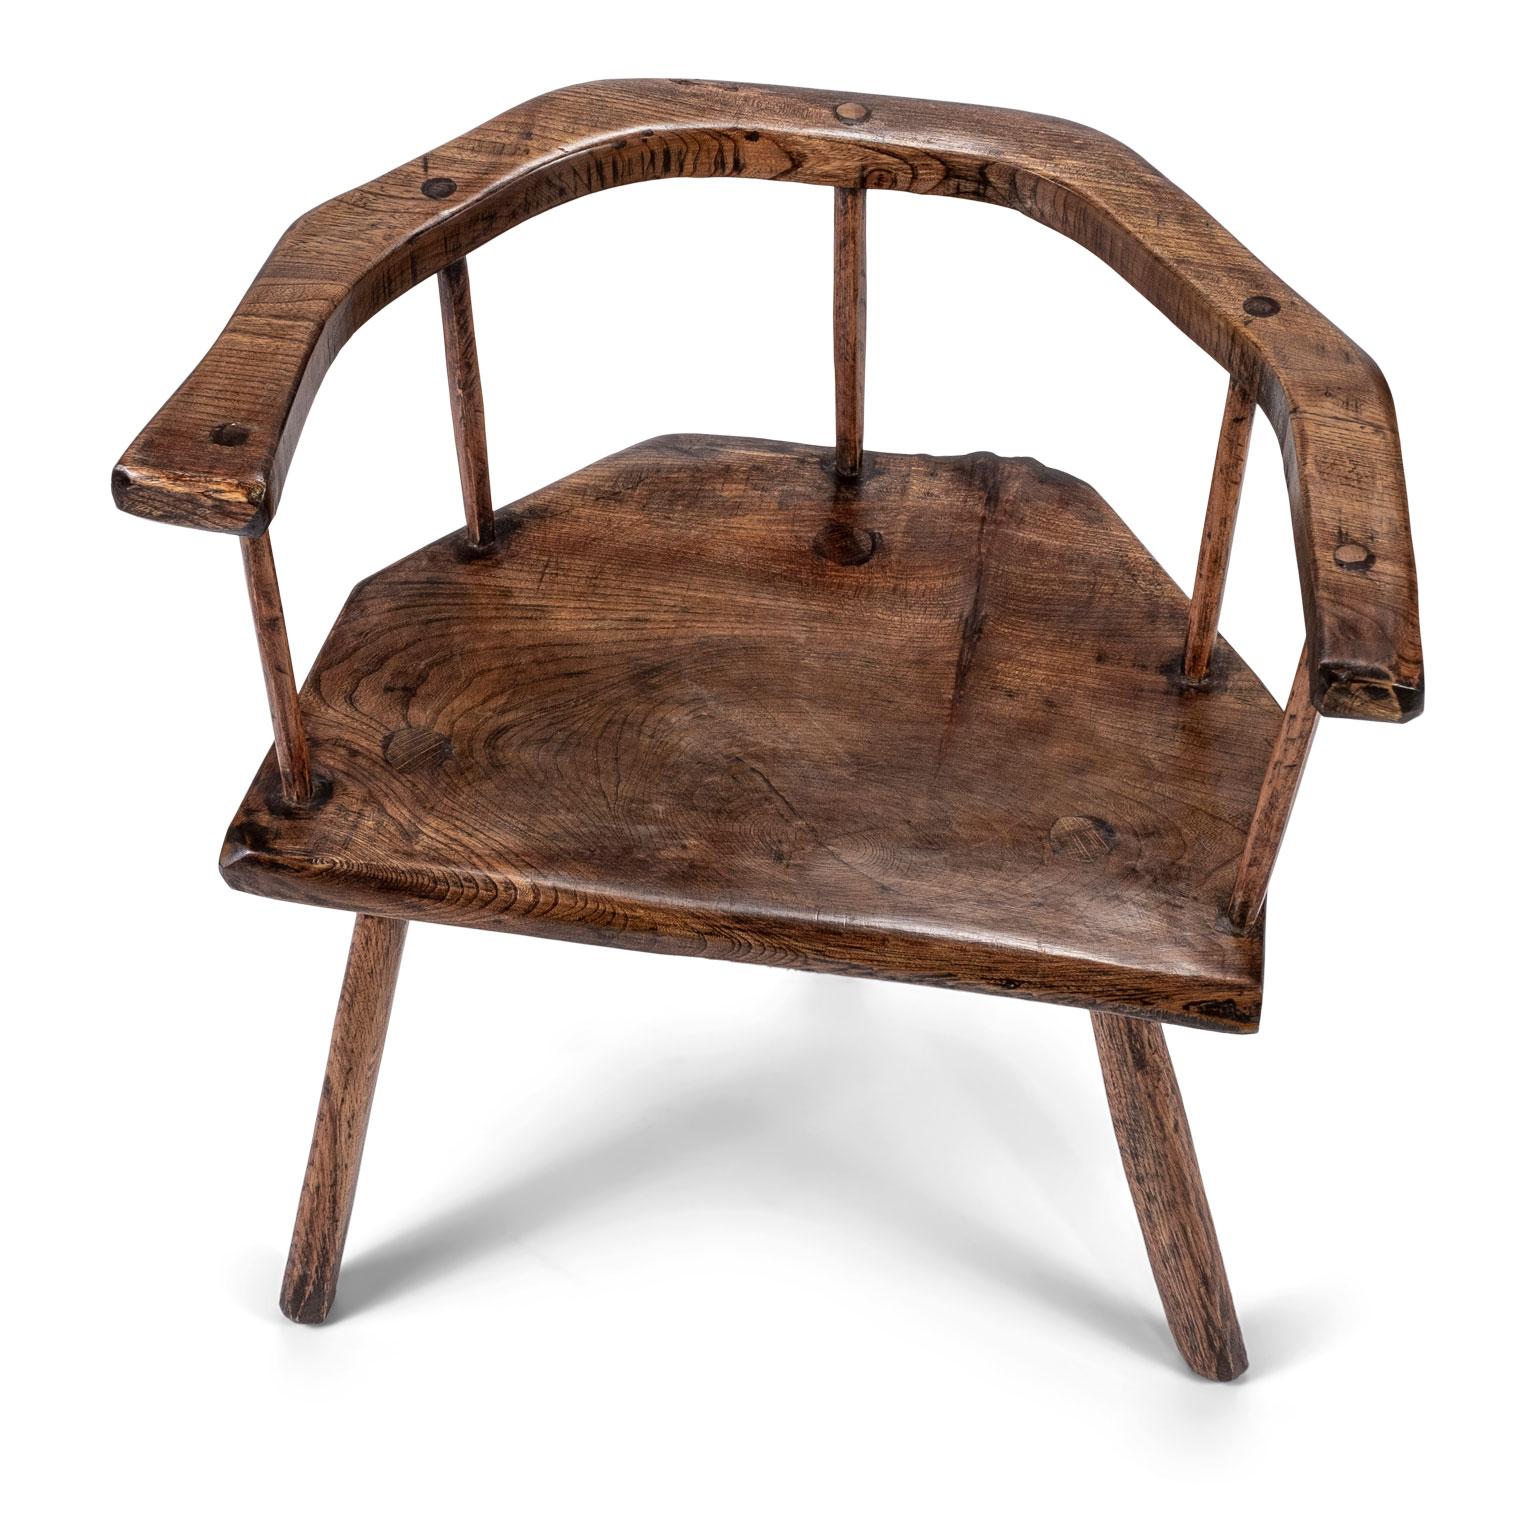 Primitive British stick chair hand-carved in elm and ashwoods. Carved elm horseshoe back rail and seat. Ash spindles and legs. Pegged construction. Gorgeous wood grain and patina. English in origin dating to the 19th century.